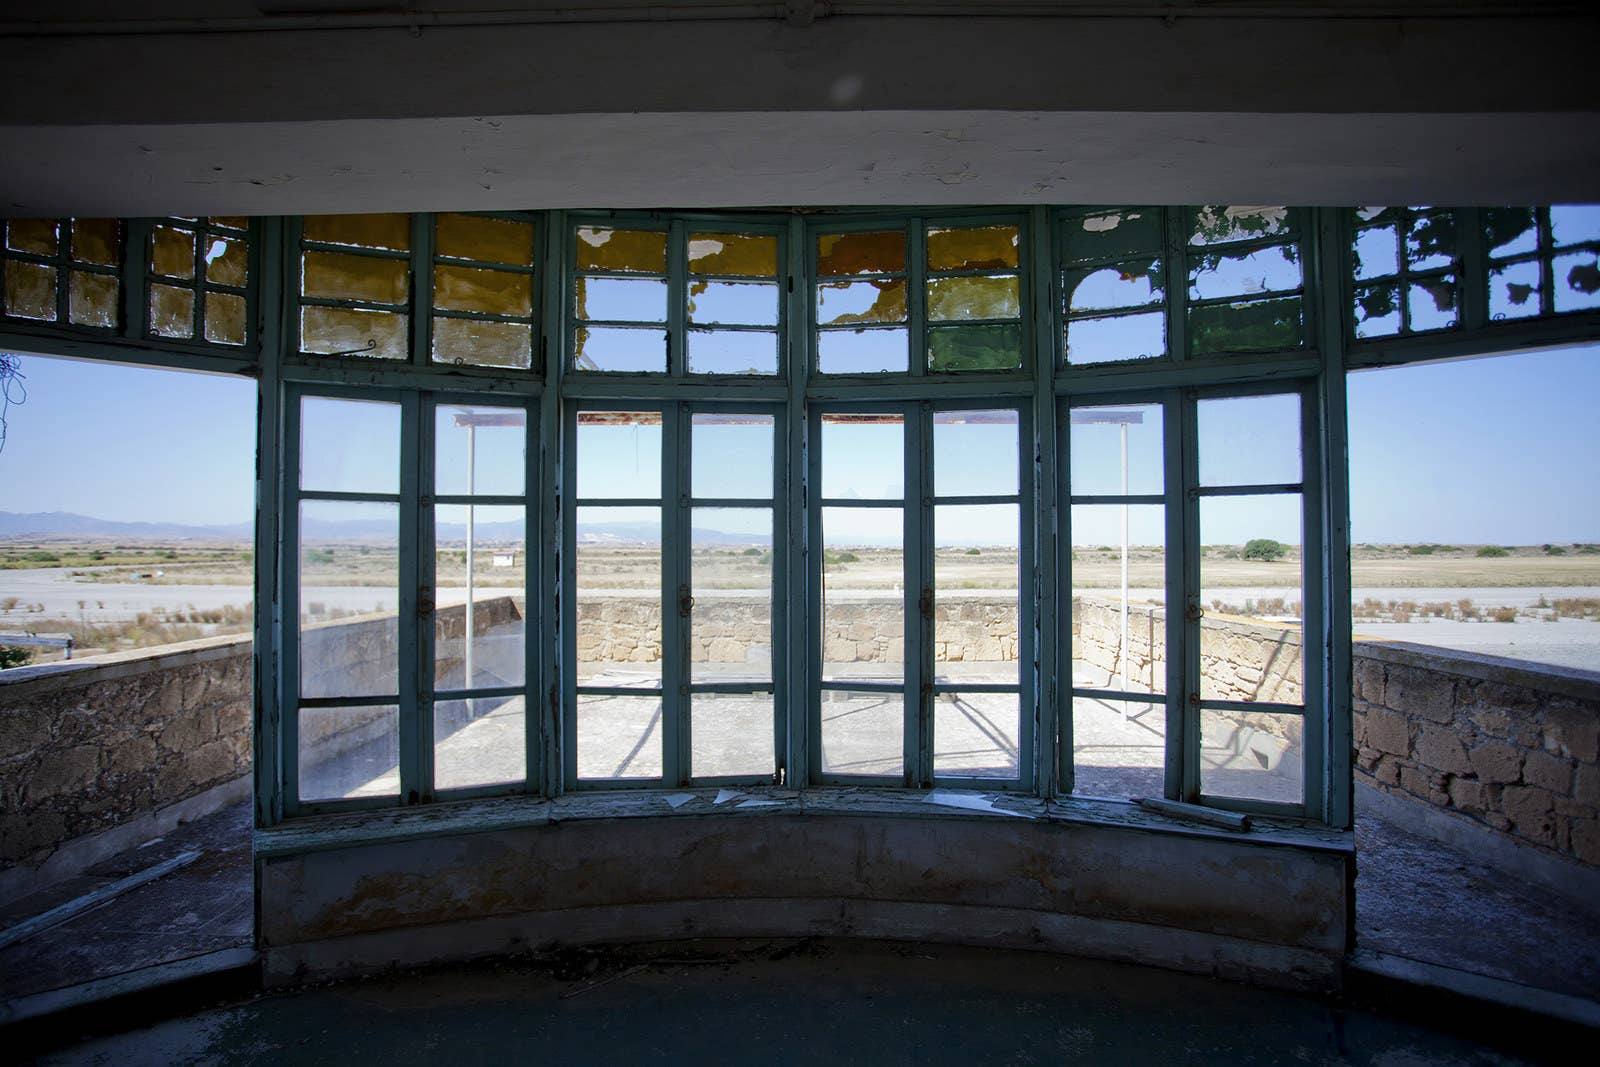 A view from the broken windows of a control tower for the runway.